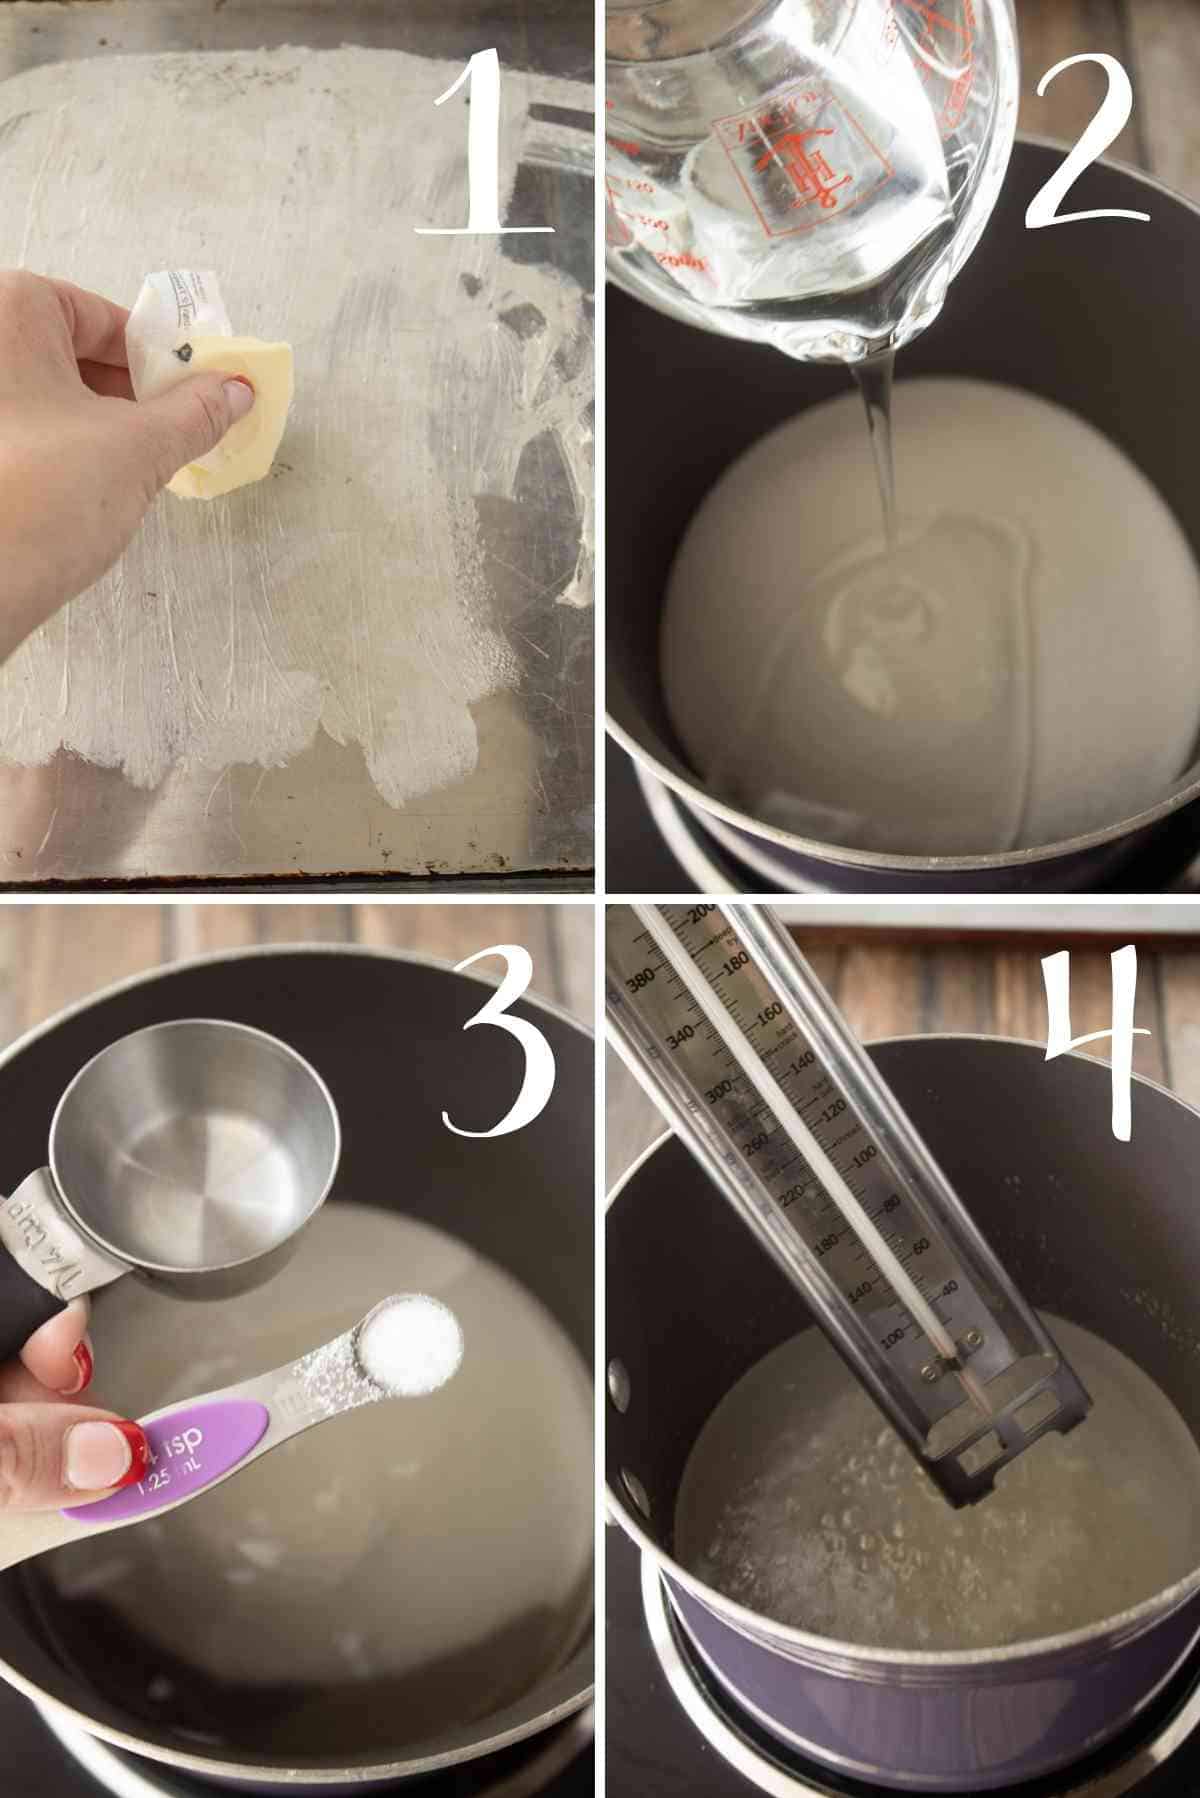 Bring sugar, corn syrup, water and salt to a boil and clip on a candy thermometer.